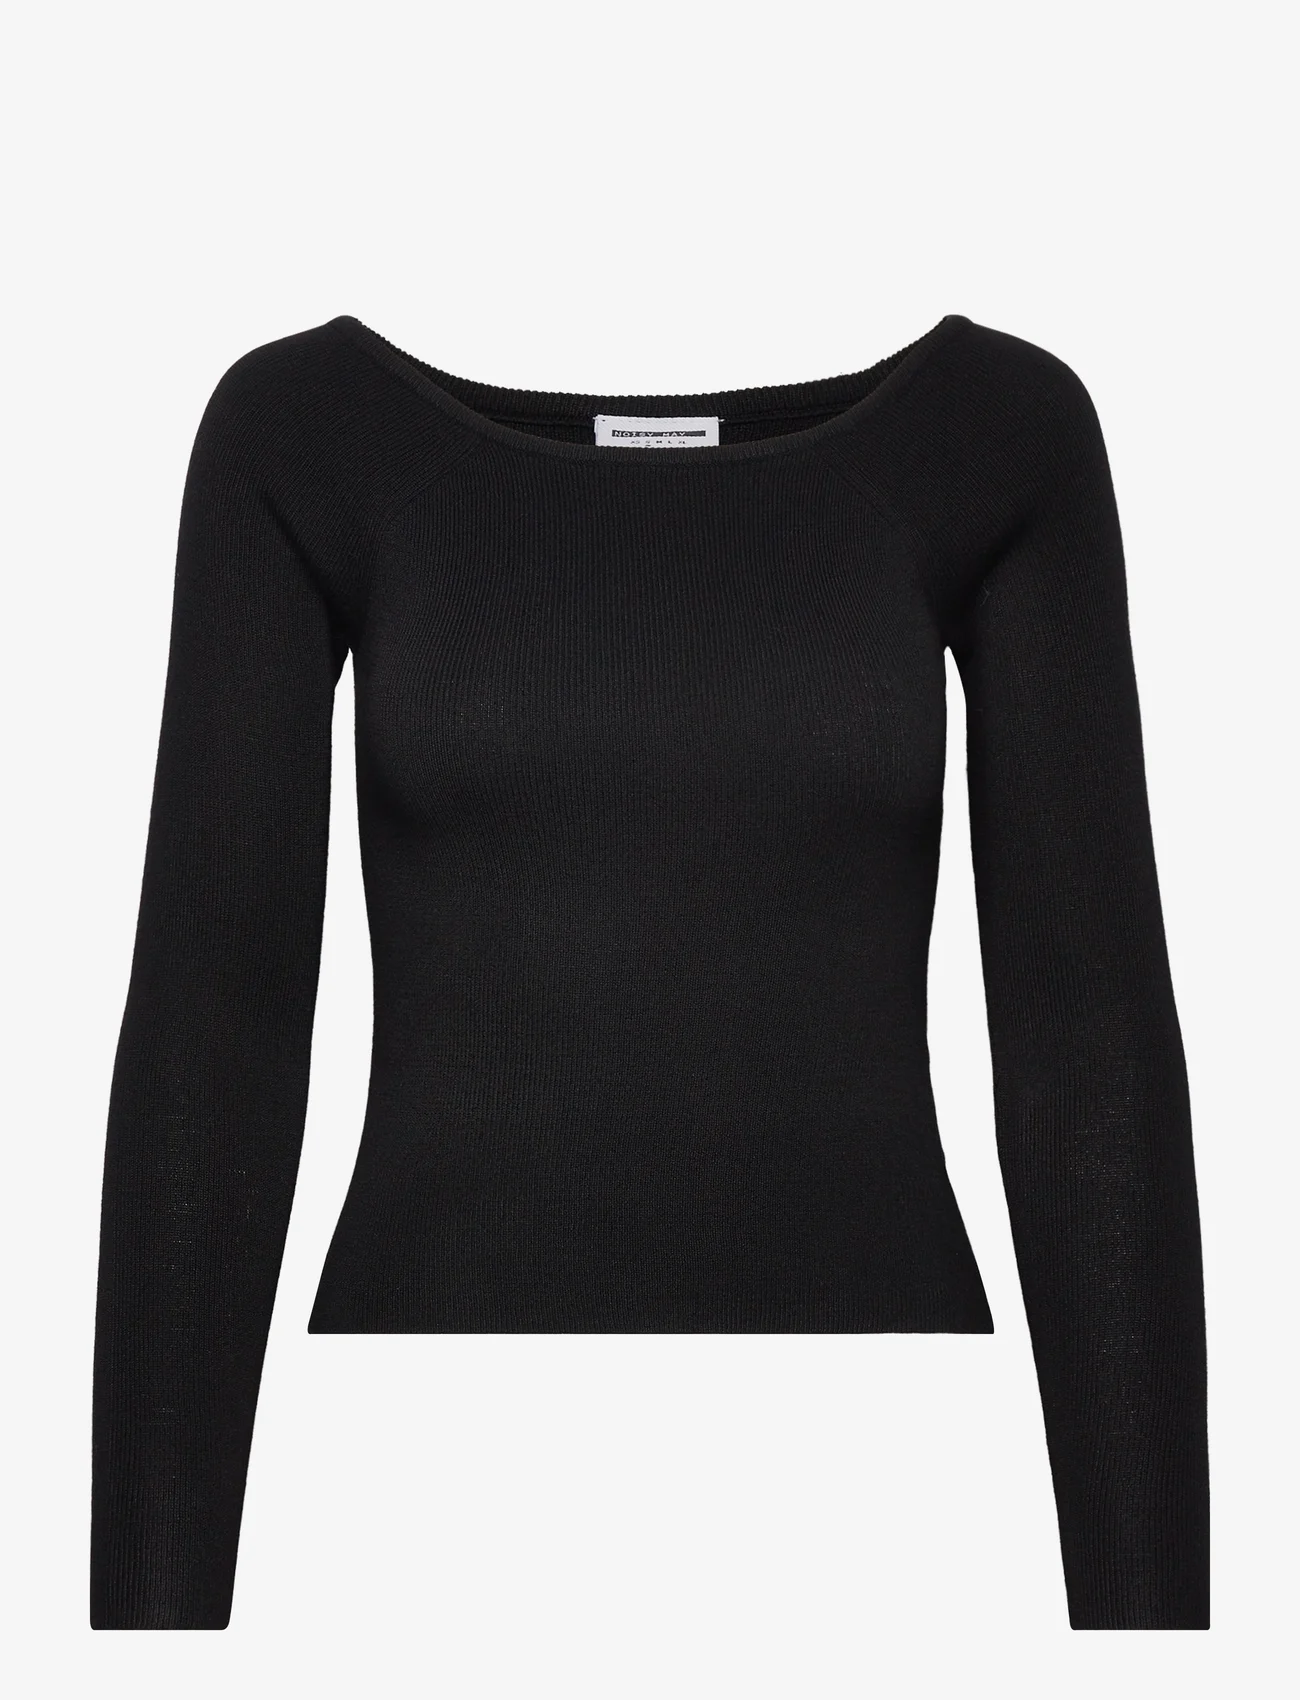 NOISY MAY - NMJAZ LS OFFSHOULDER KNIT TOP FWD LAB 2 - truien - black - 0